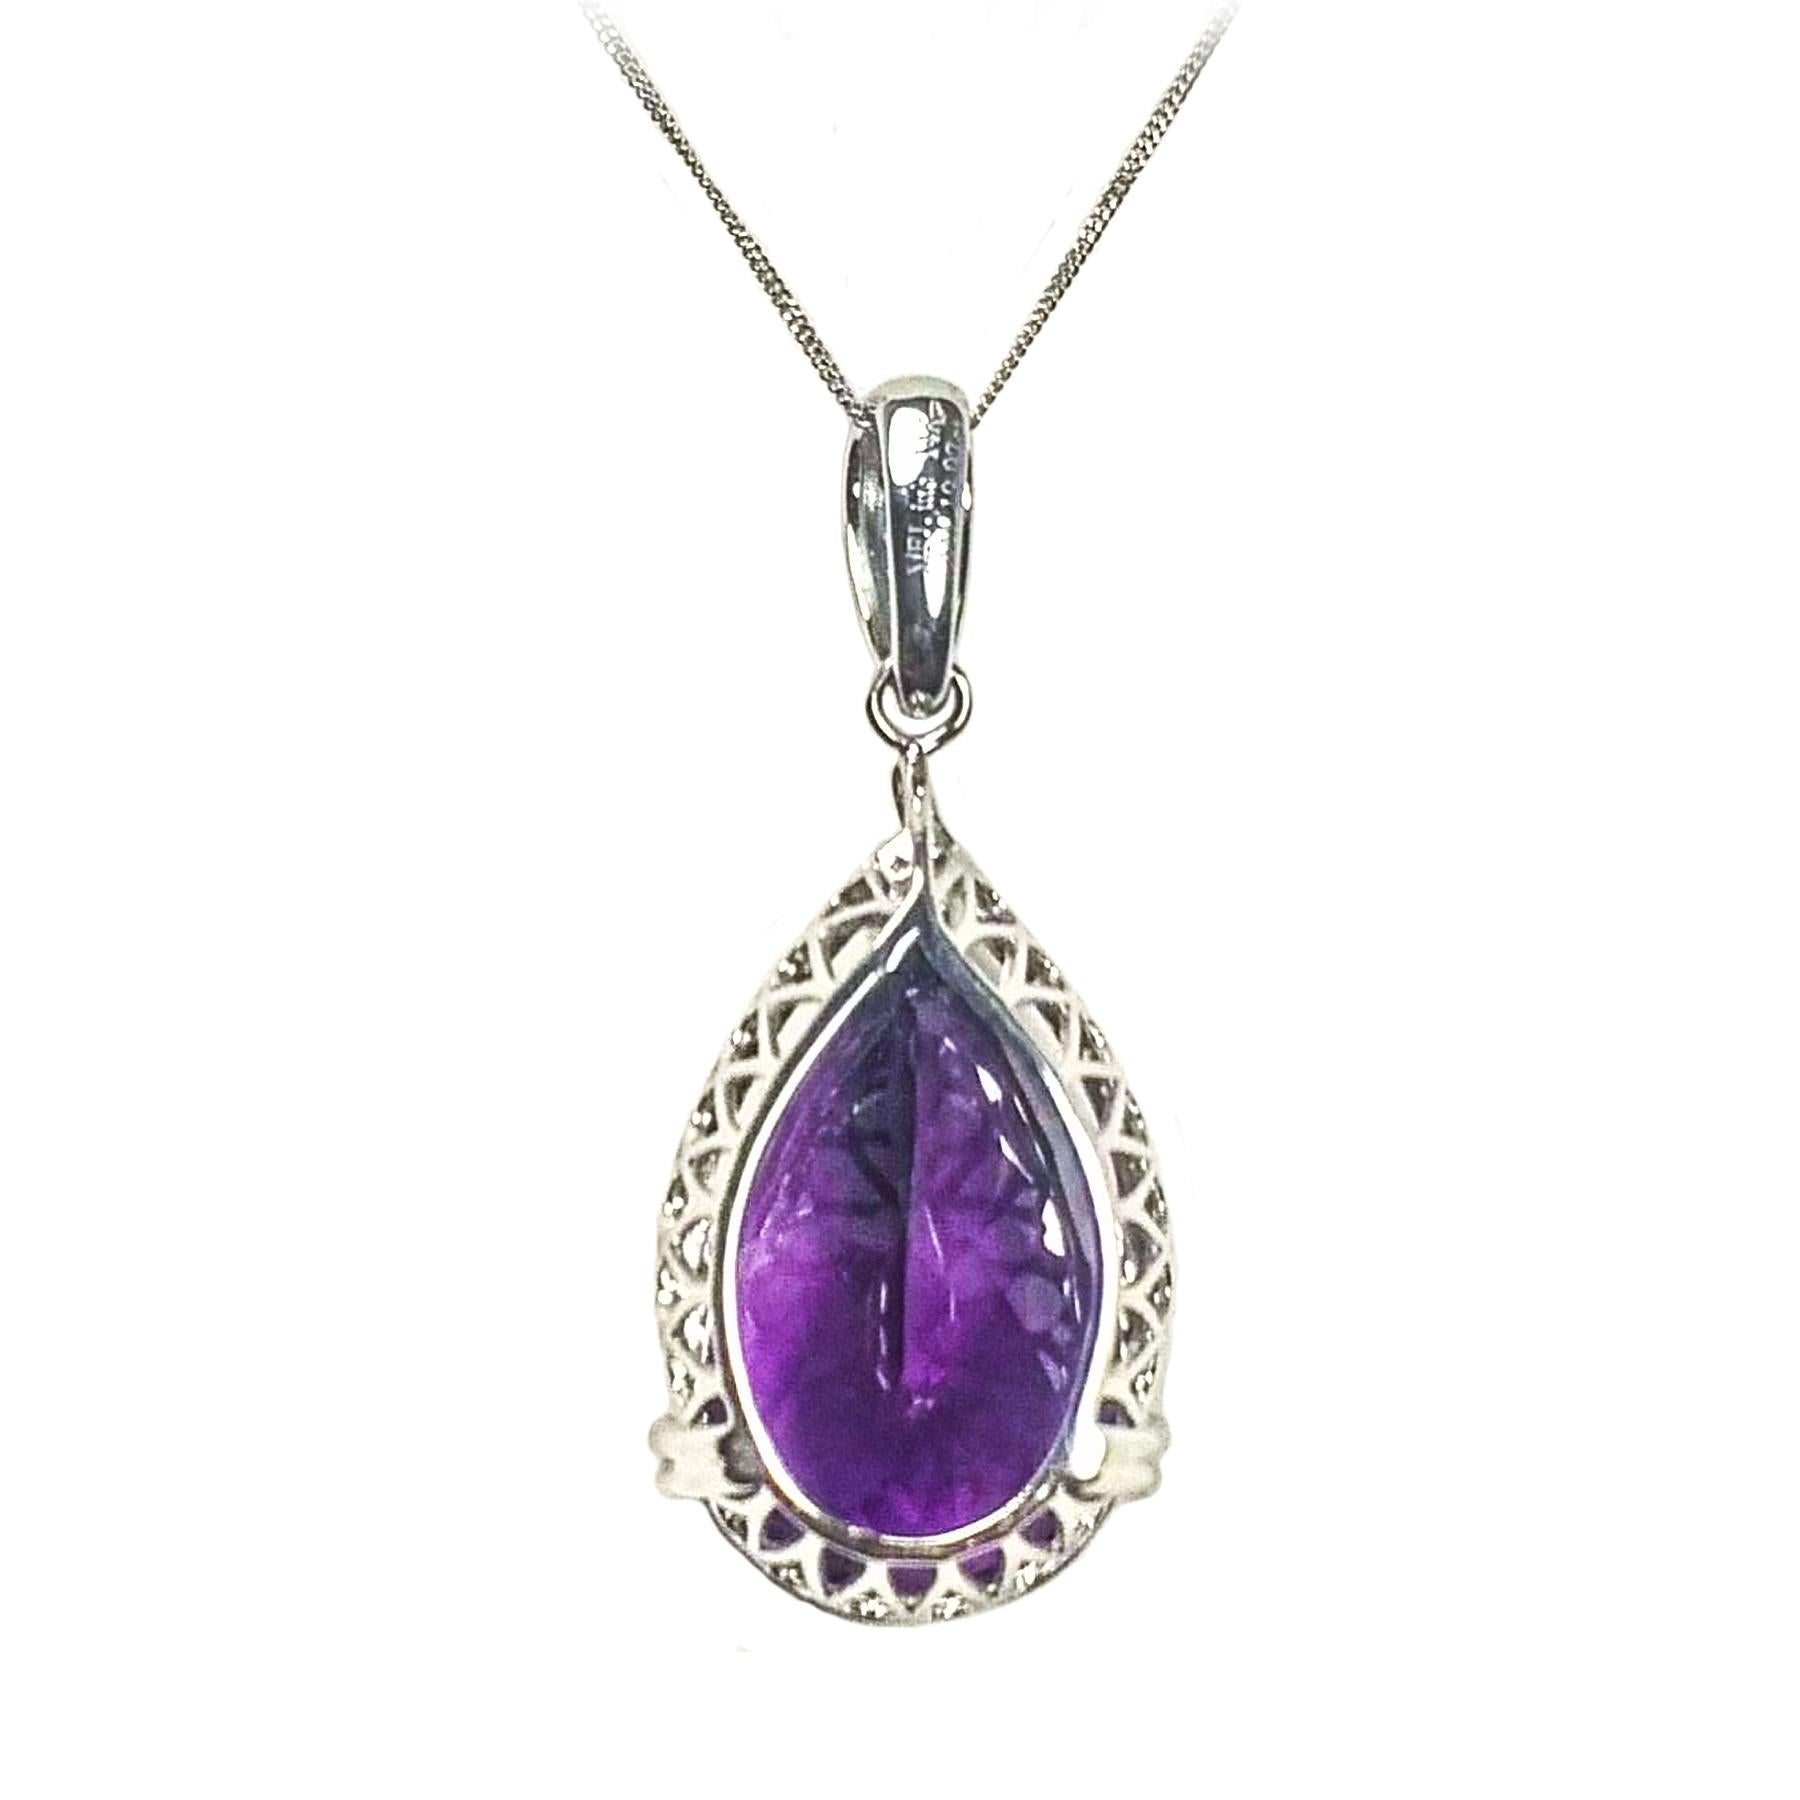 Elegant purple amethyst and diamond pendant. Contemporary, handcrafted intense purple, transparency and luster,  pear shape amethyst encased in basket mounting with four bead prongs and split prong. Encased in round brilliant cut diamond design with